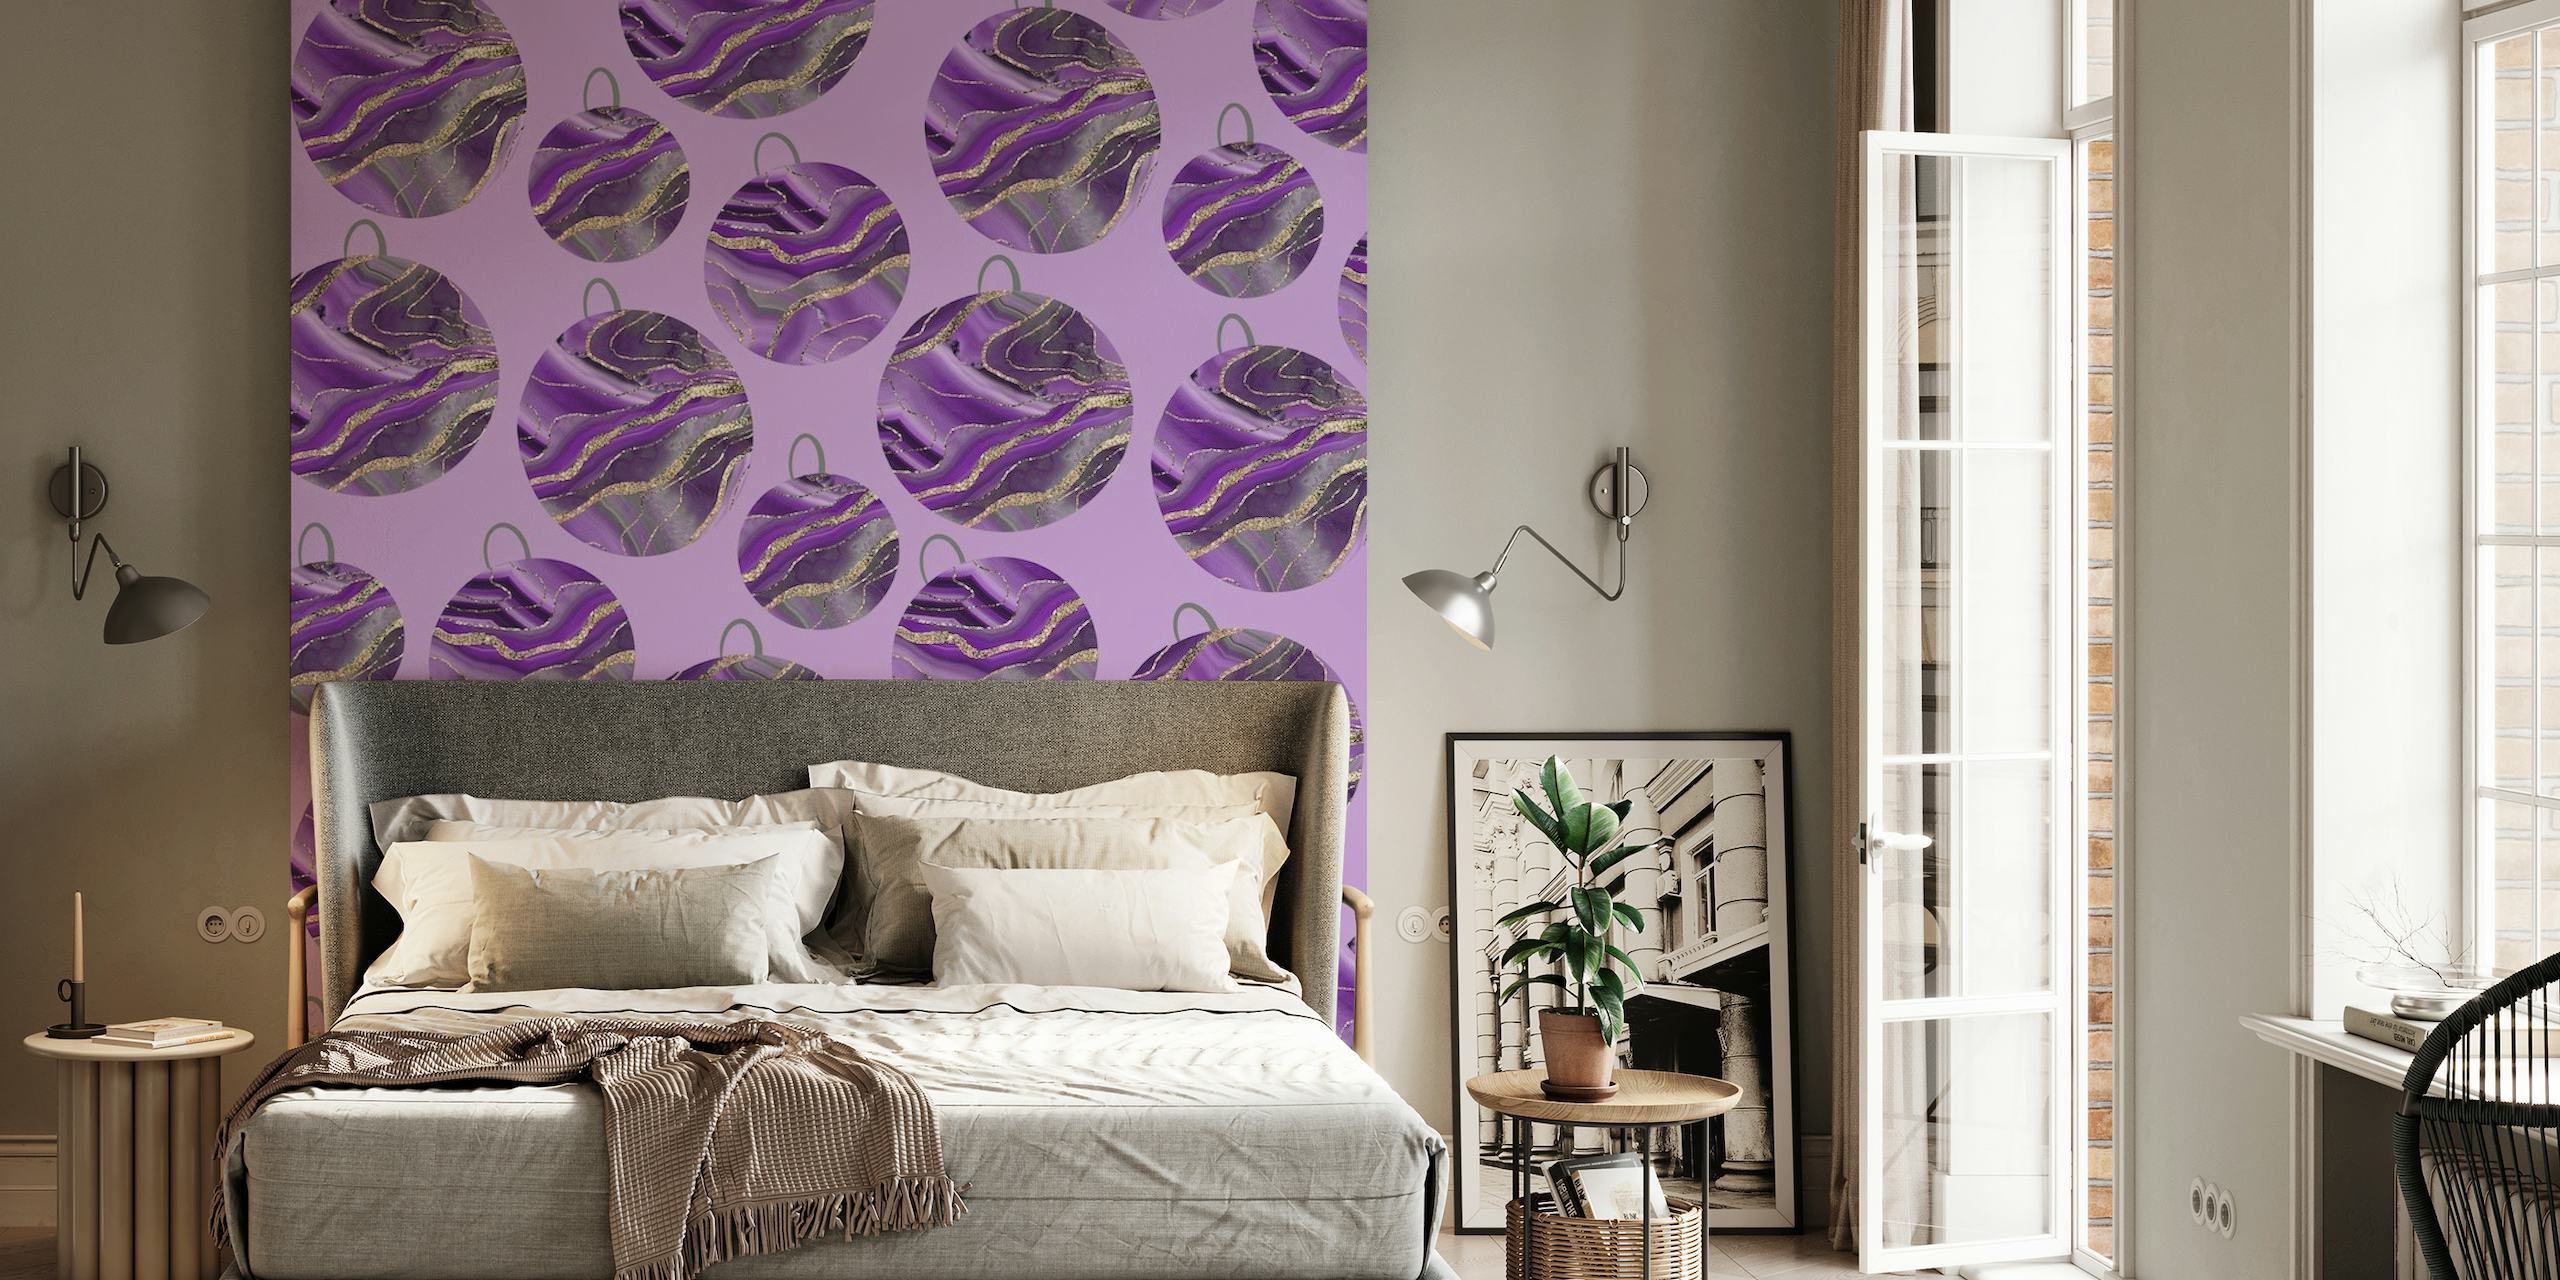 Christmas balls with glittering swirls on a purple background wall mural